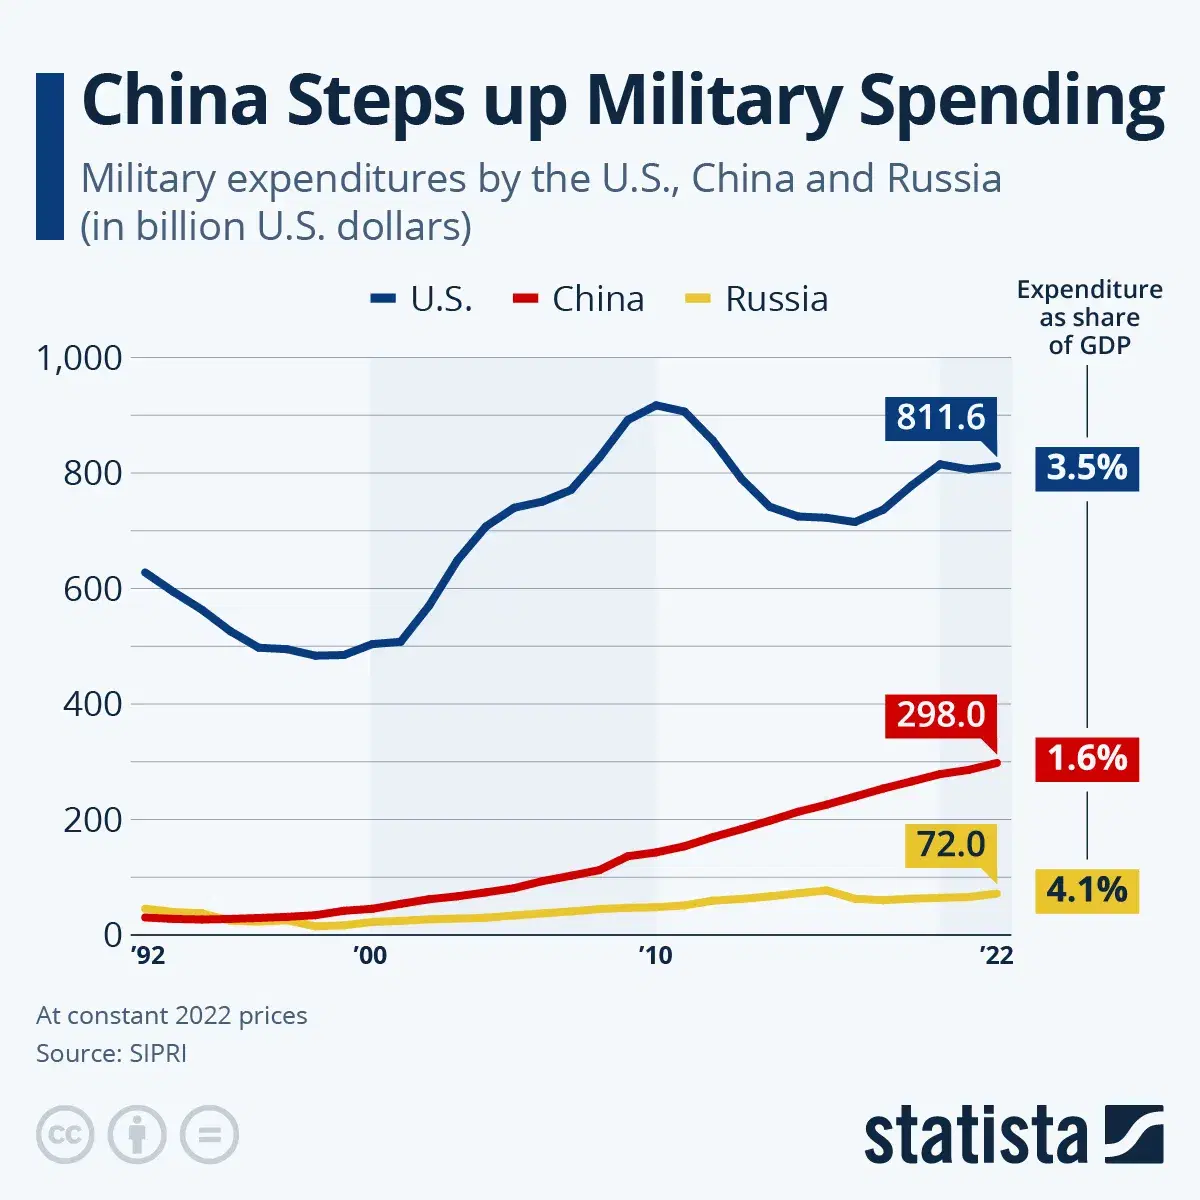 China Steps Up Military Spending